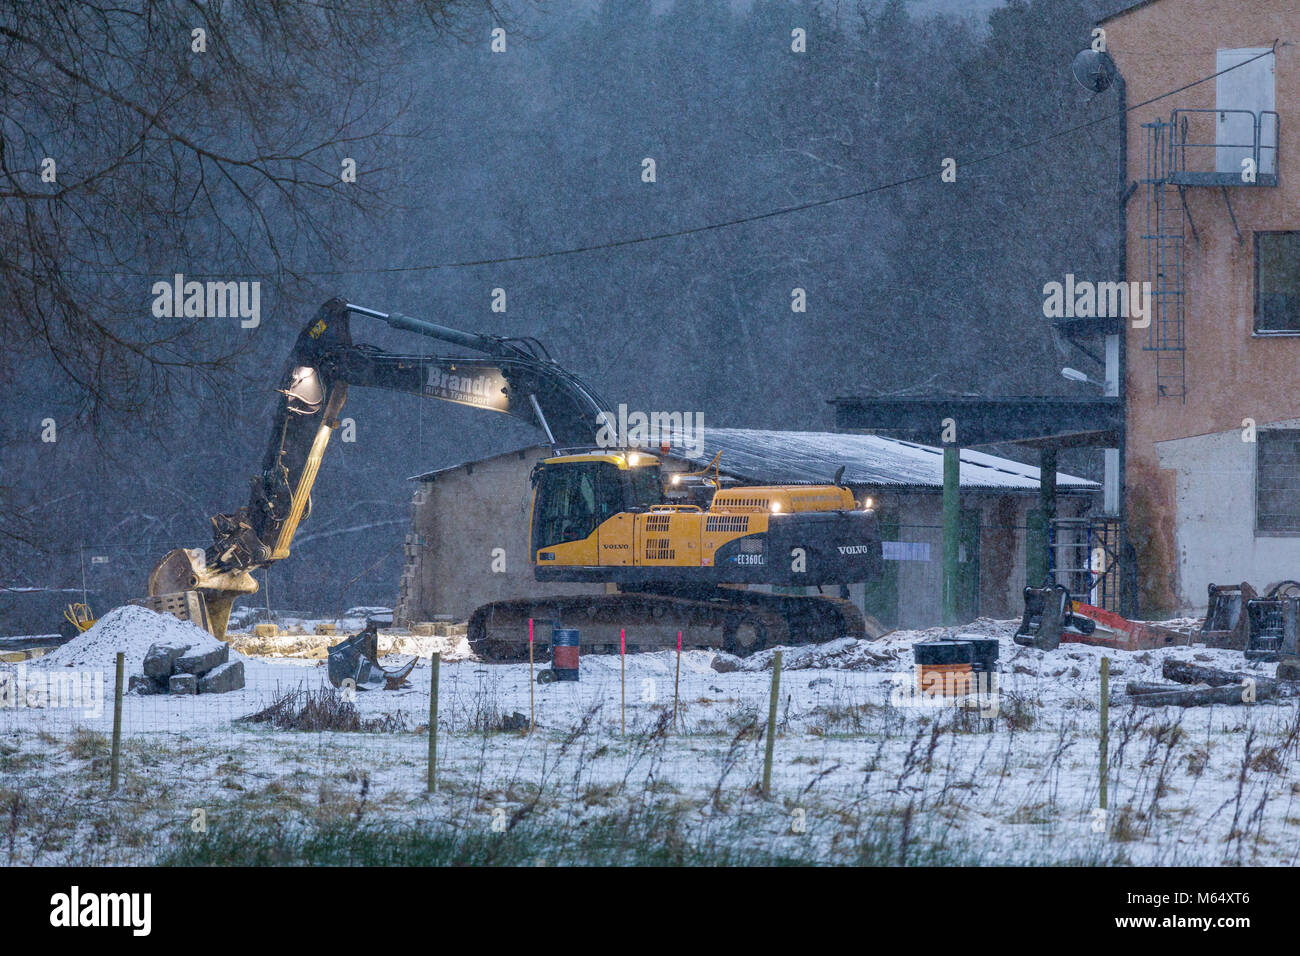 FLODA, SWEDEN - FEBRUARY 2 2018: Mobile articulated excavator working at building site during snowfall in winter  Model Release: No.  Property release: No. Stock Photo